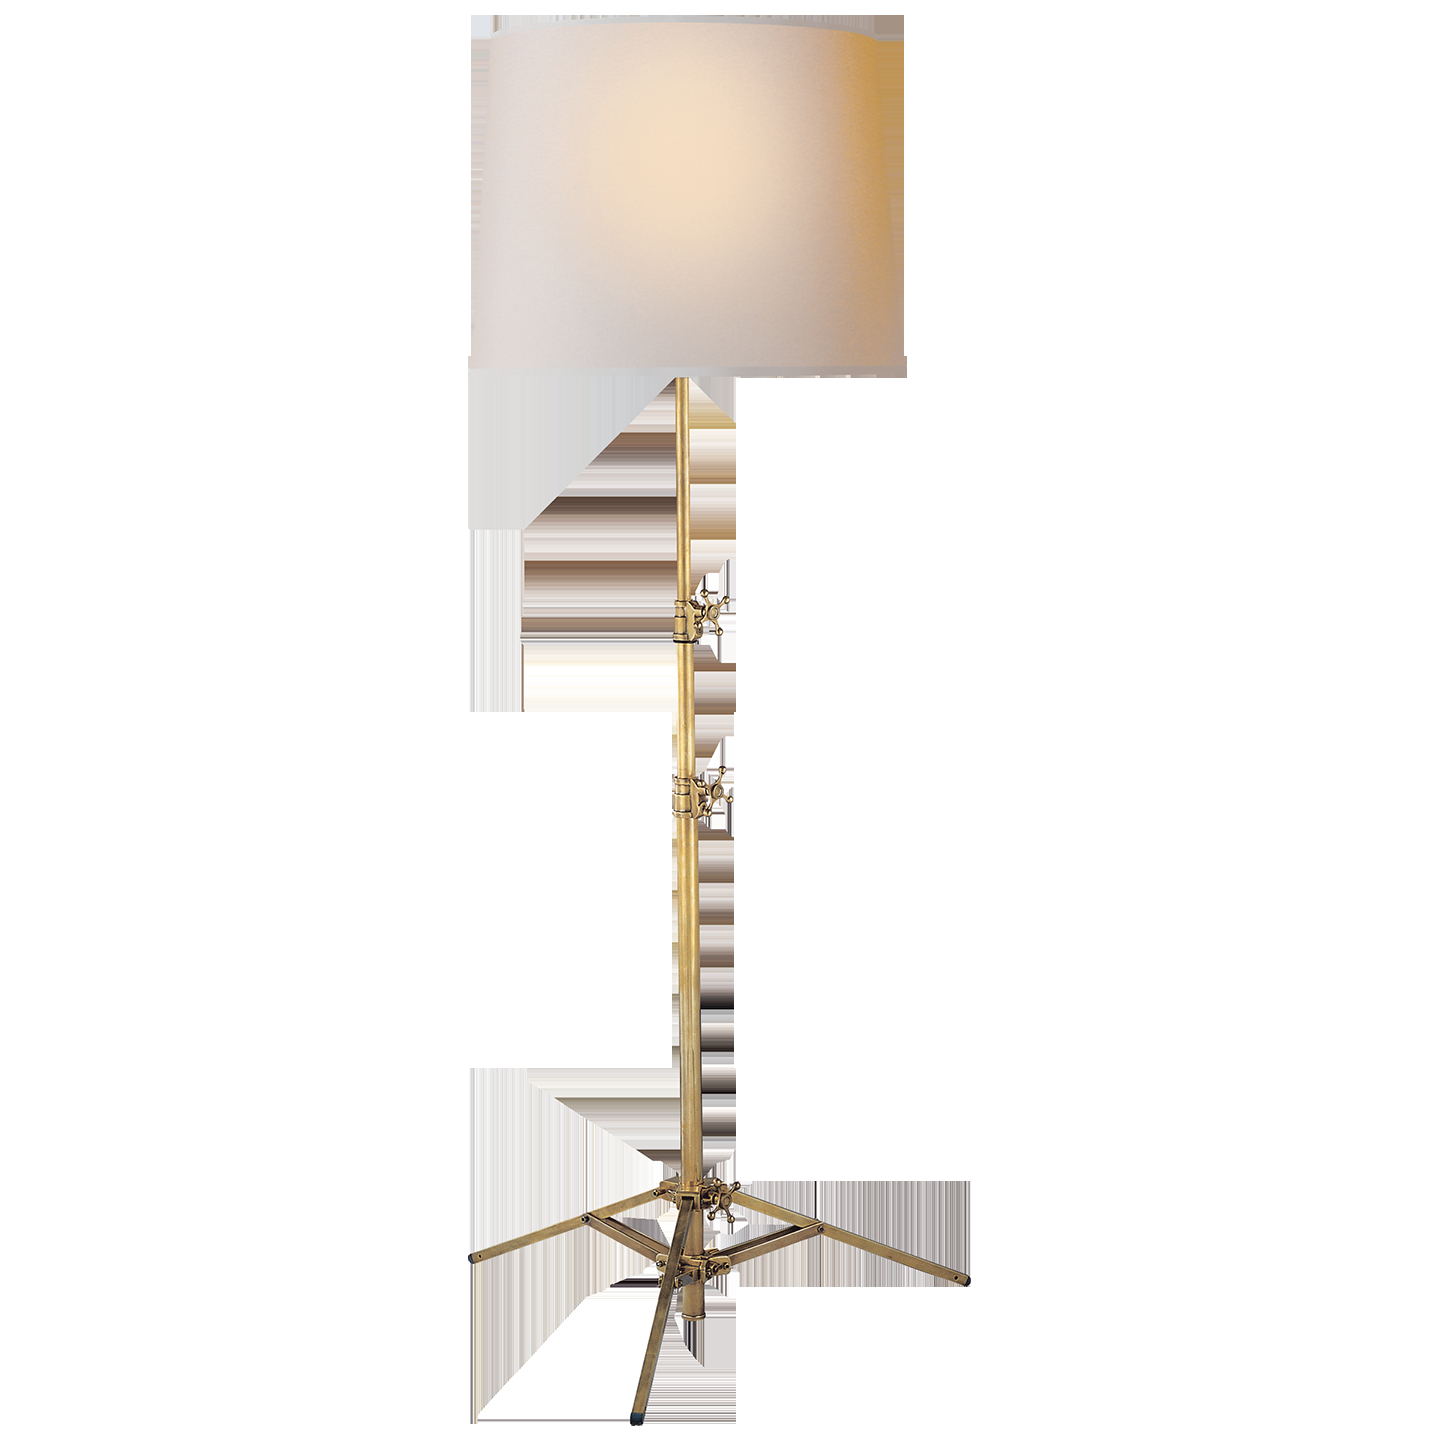 Studio Floor Lamp In Hand Rubbed Antique Brass With Natural pertaining to dimensions 1440 X 1440